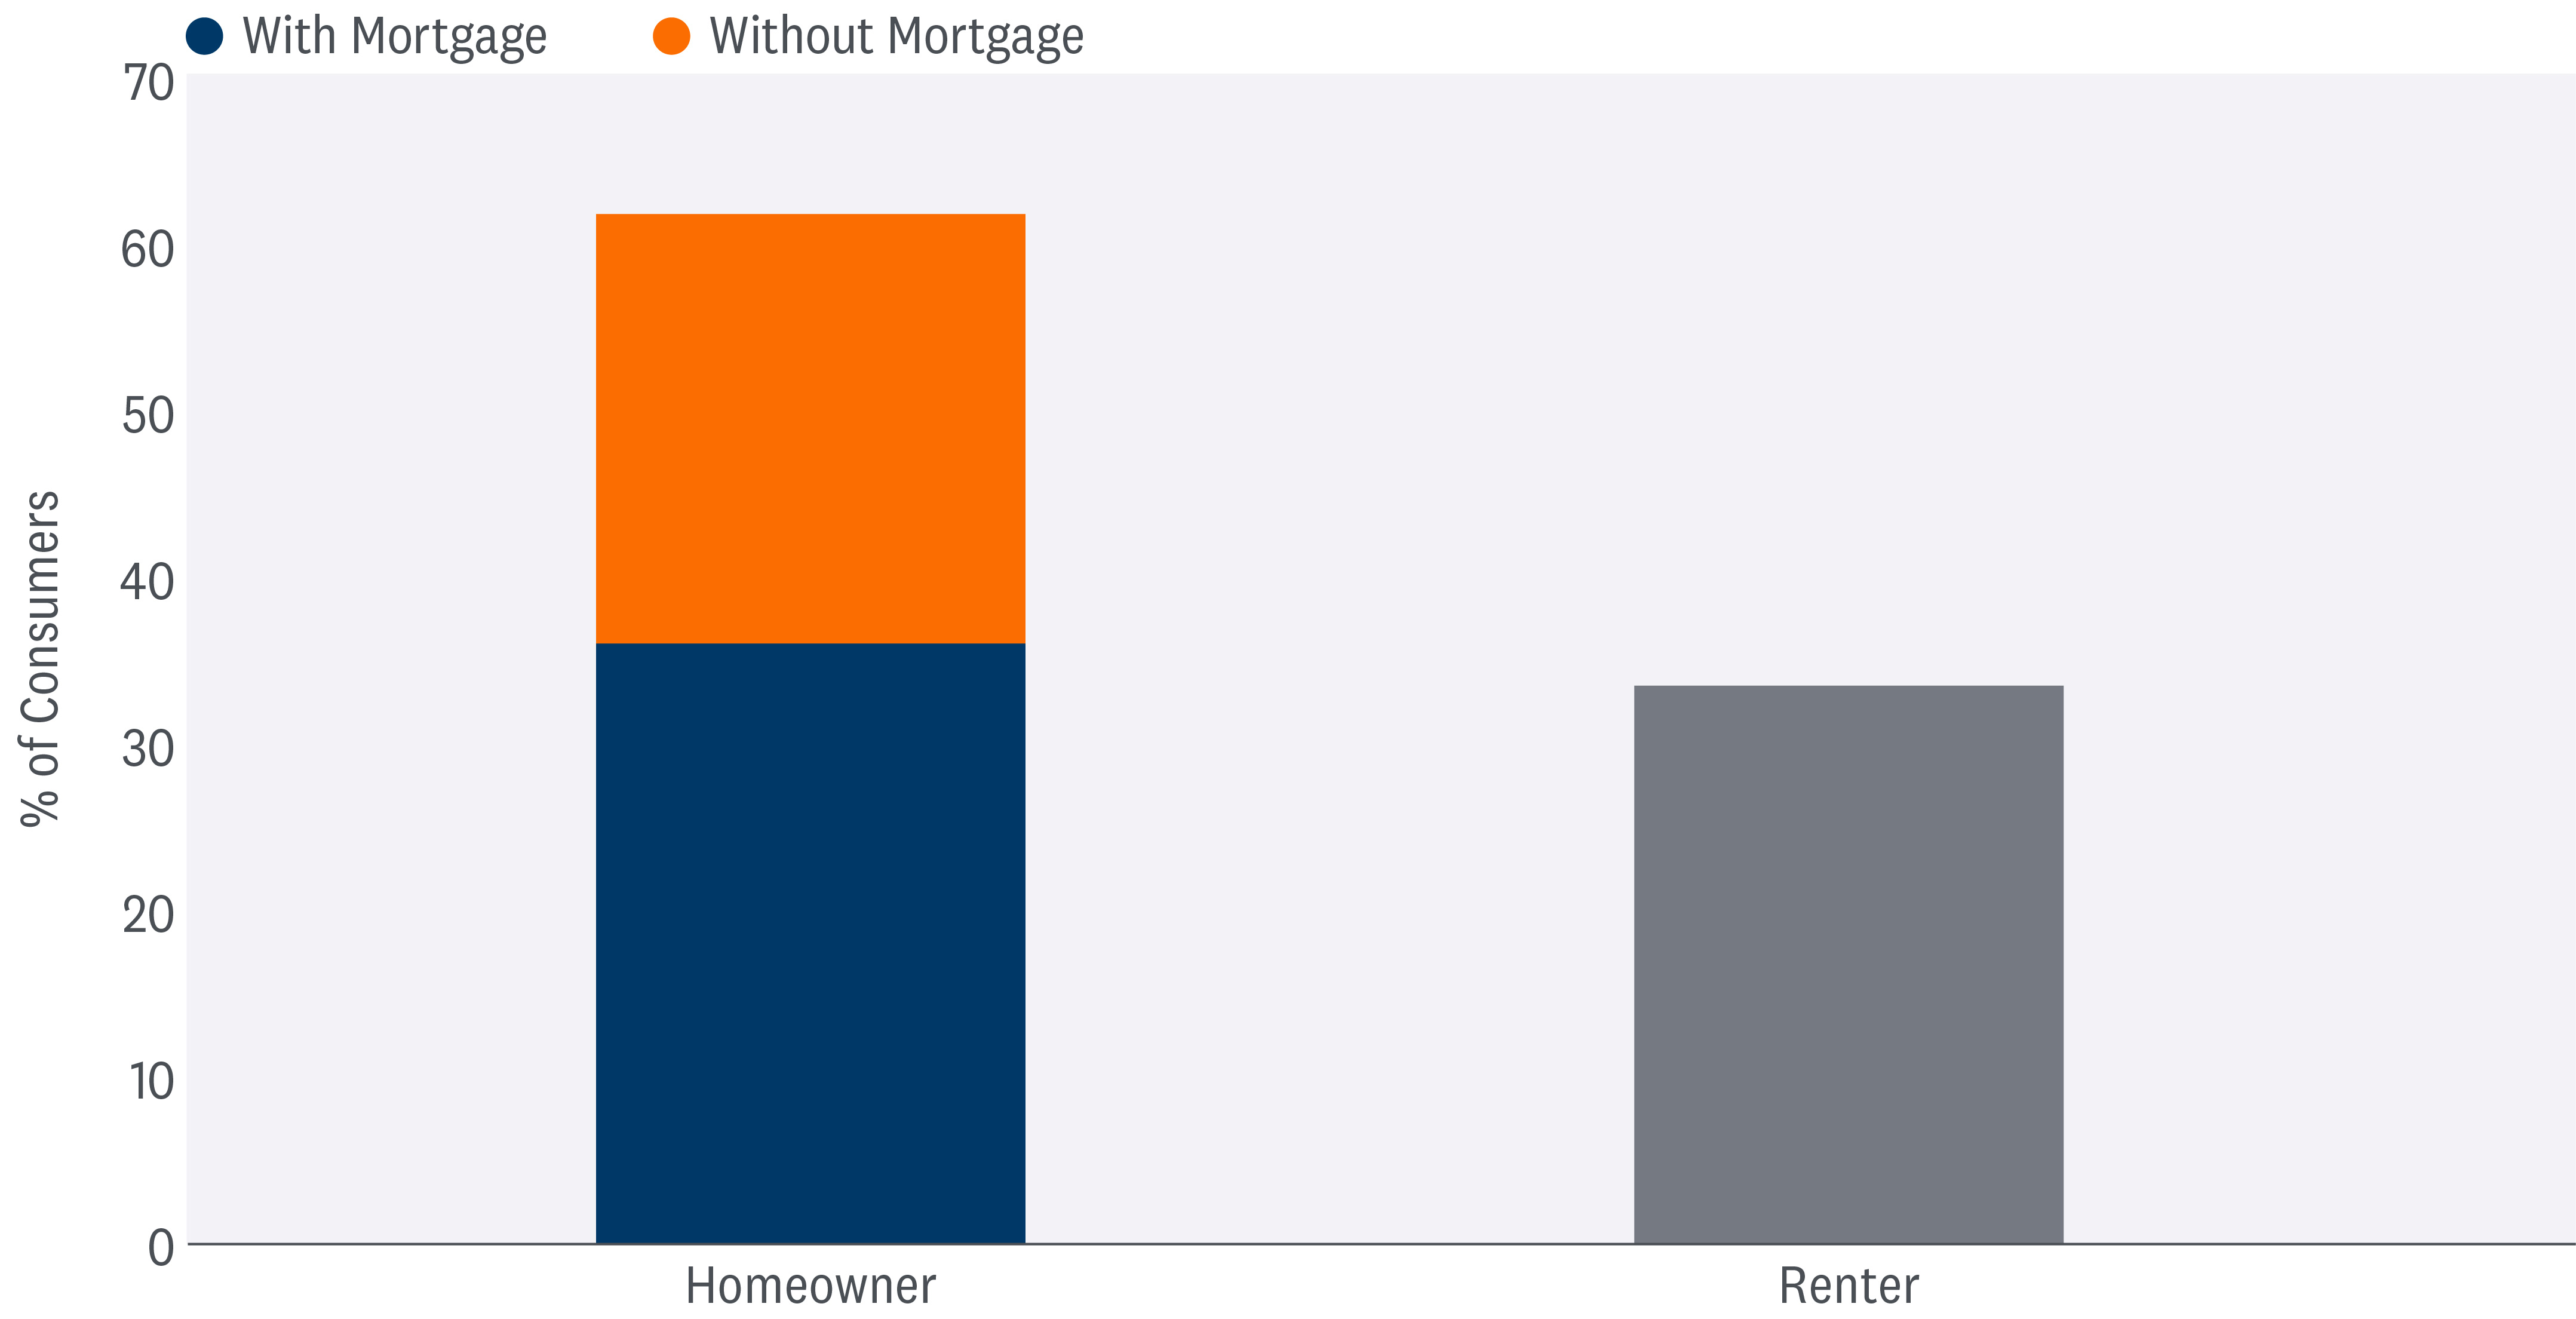 Bar graph depicting percentage of consumers who are homeowners with a mortgage versus renters without a mortgage.